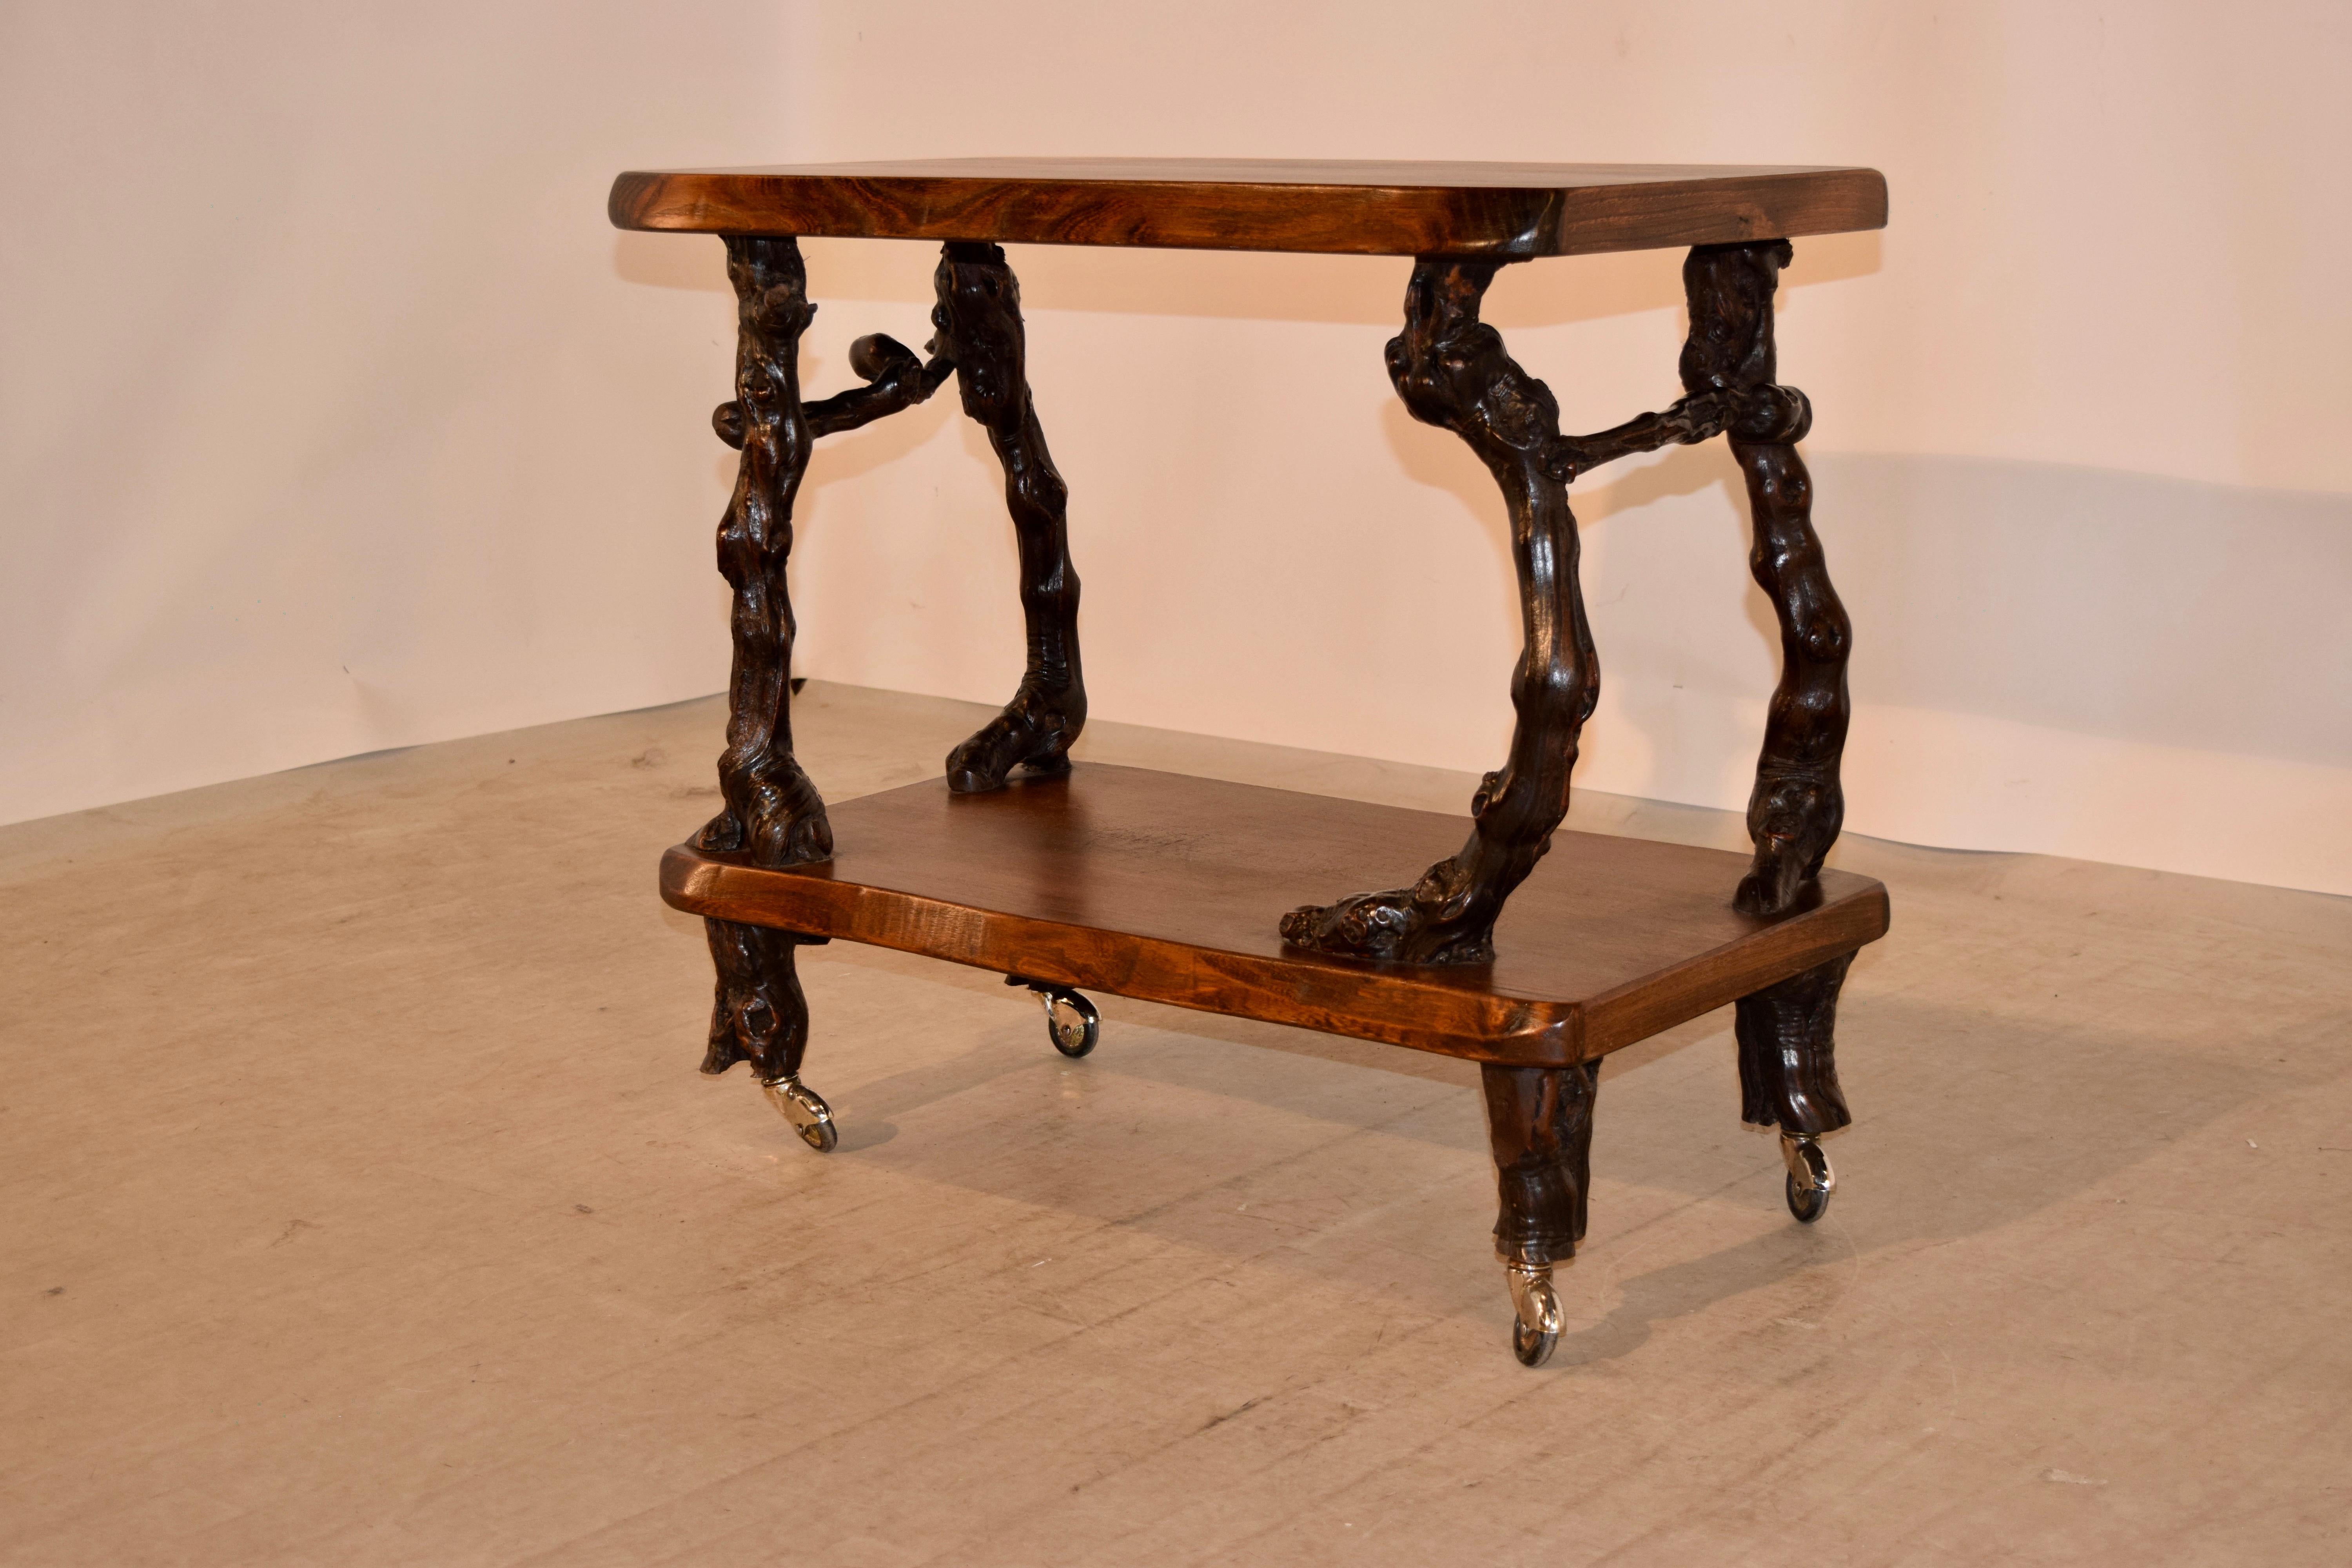 French bar cart made from walnut shelves separated by grapevine legs and stretchers, circa 1920s. The feet are also made form grapevines over original brass casters.